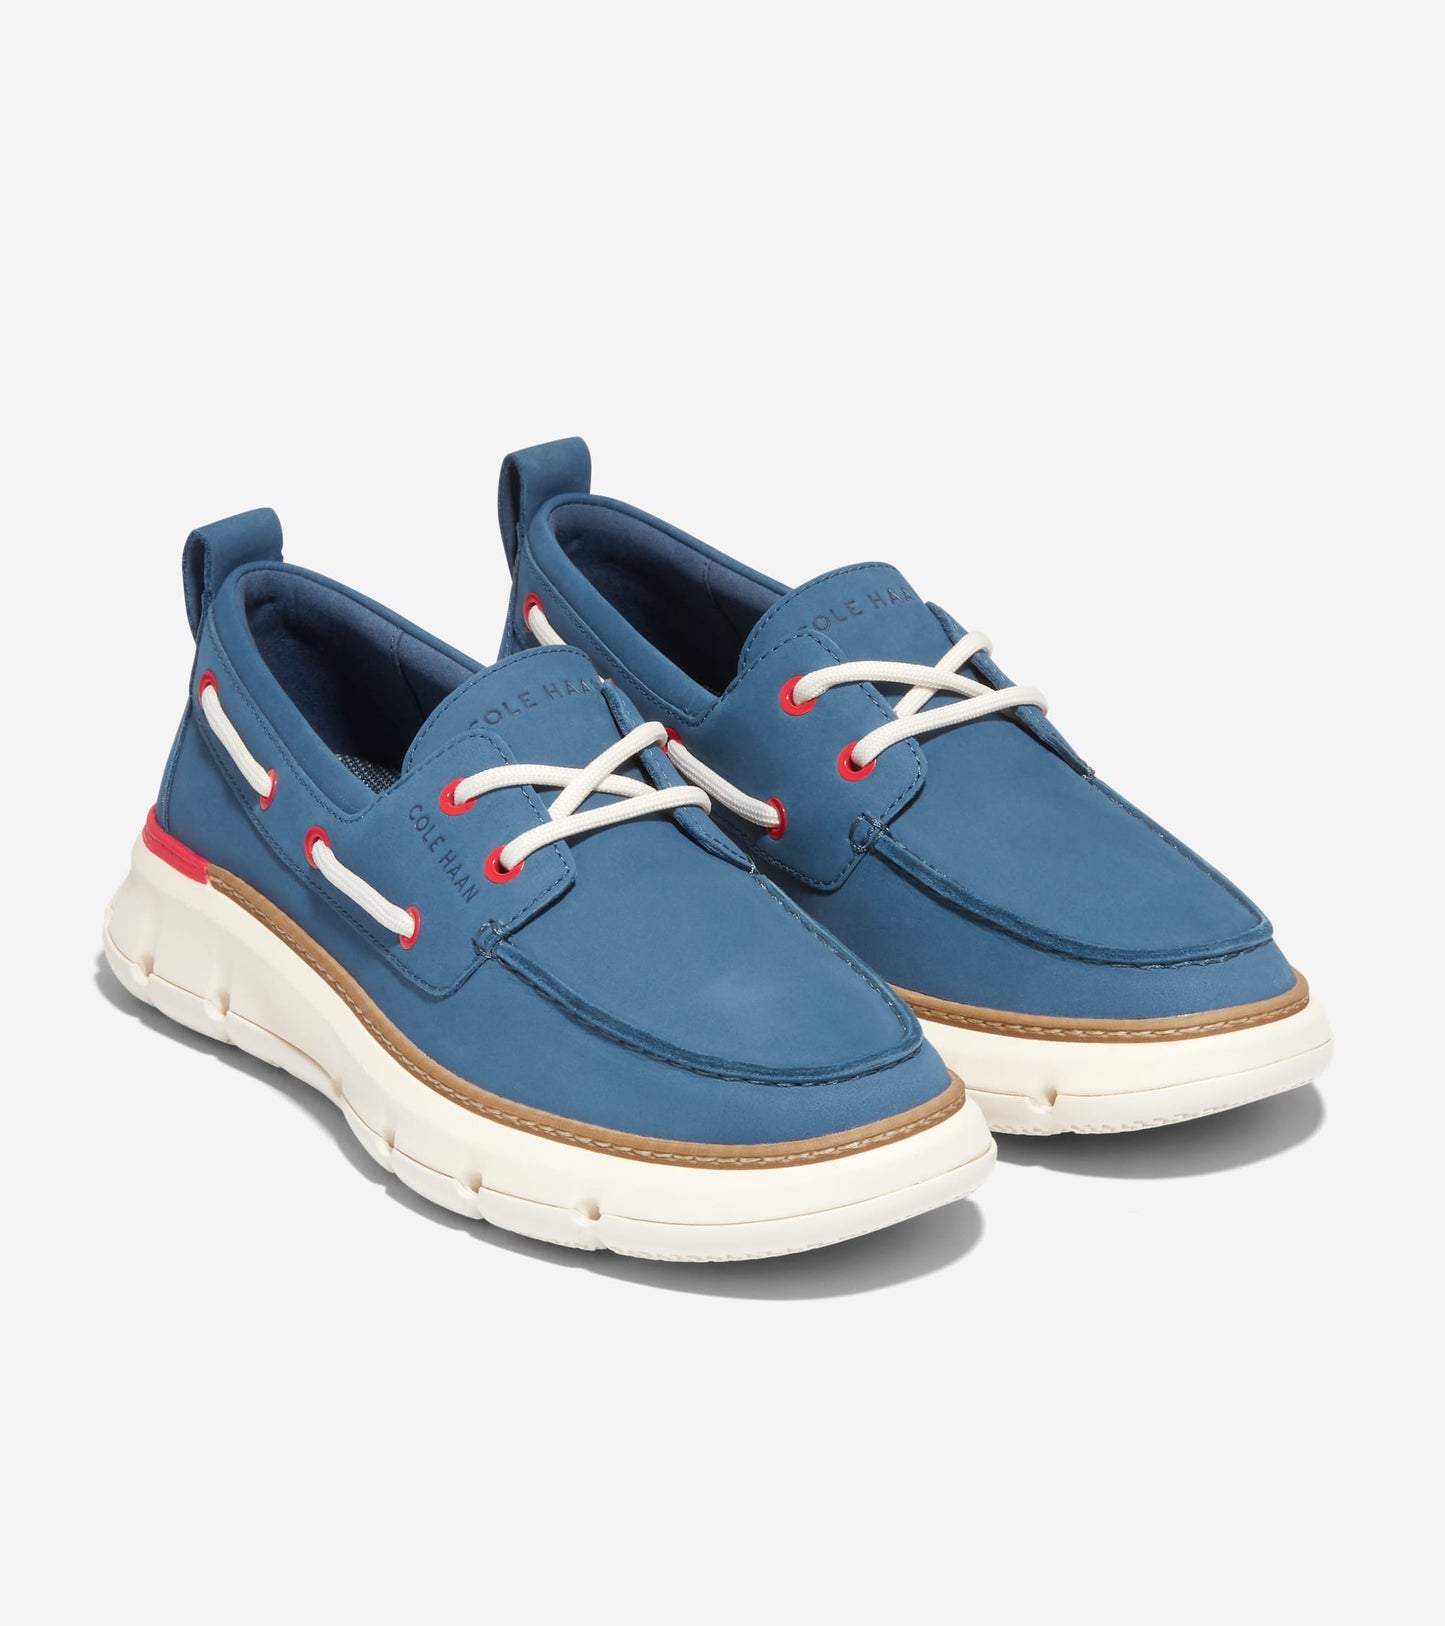 W28991:ENSIGN BLUE/FIERY RED/IVORY (8086472130807)